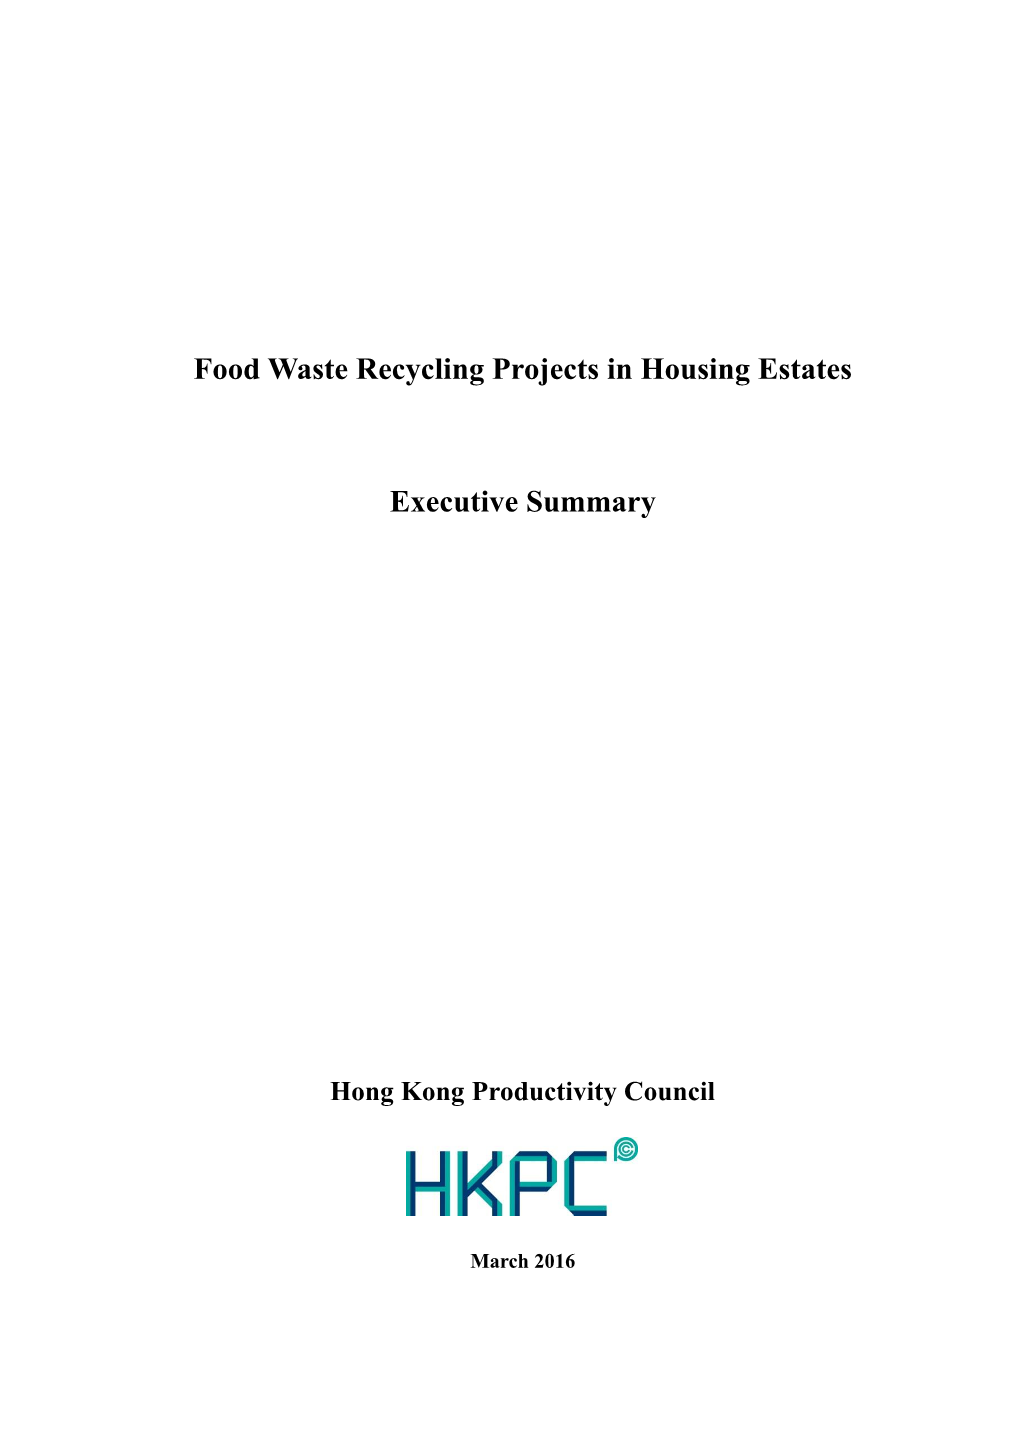 Food Waste Recycling Projects in Housing Estates Executive Summary Environmental Protection Department